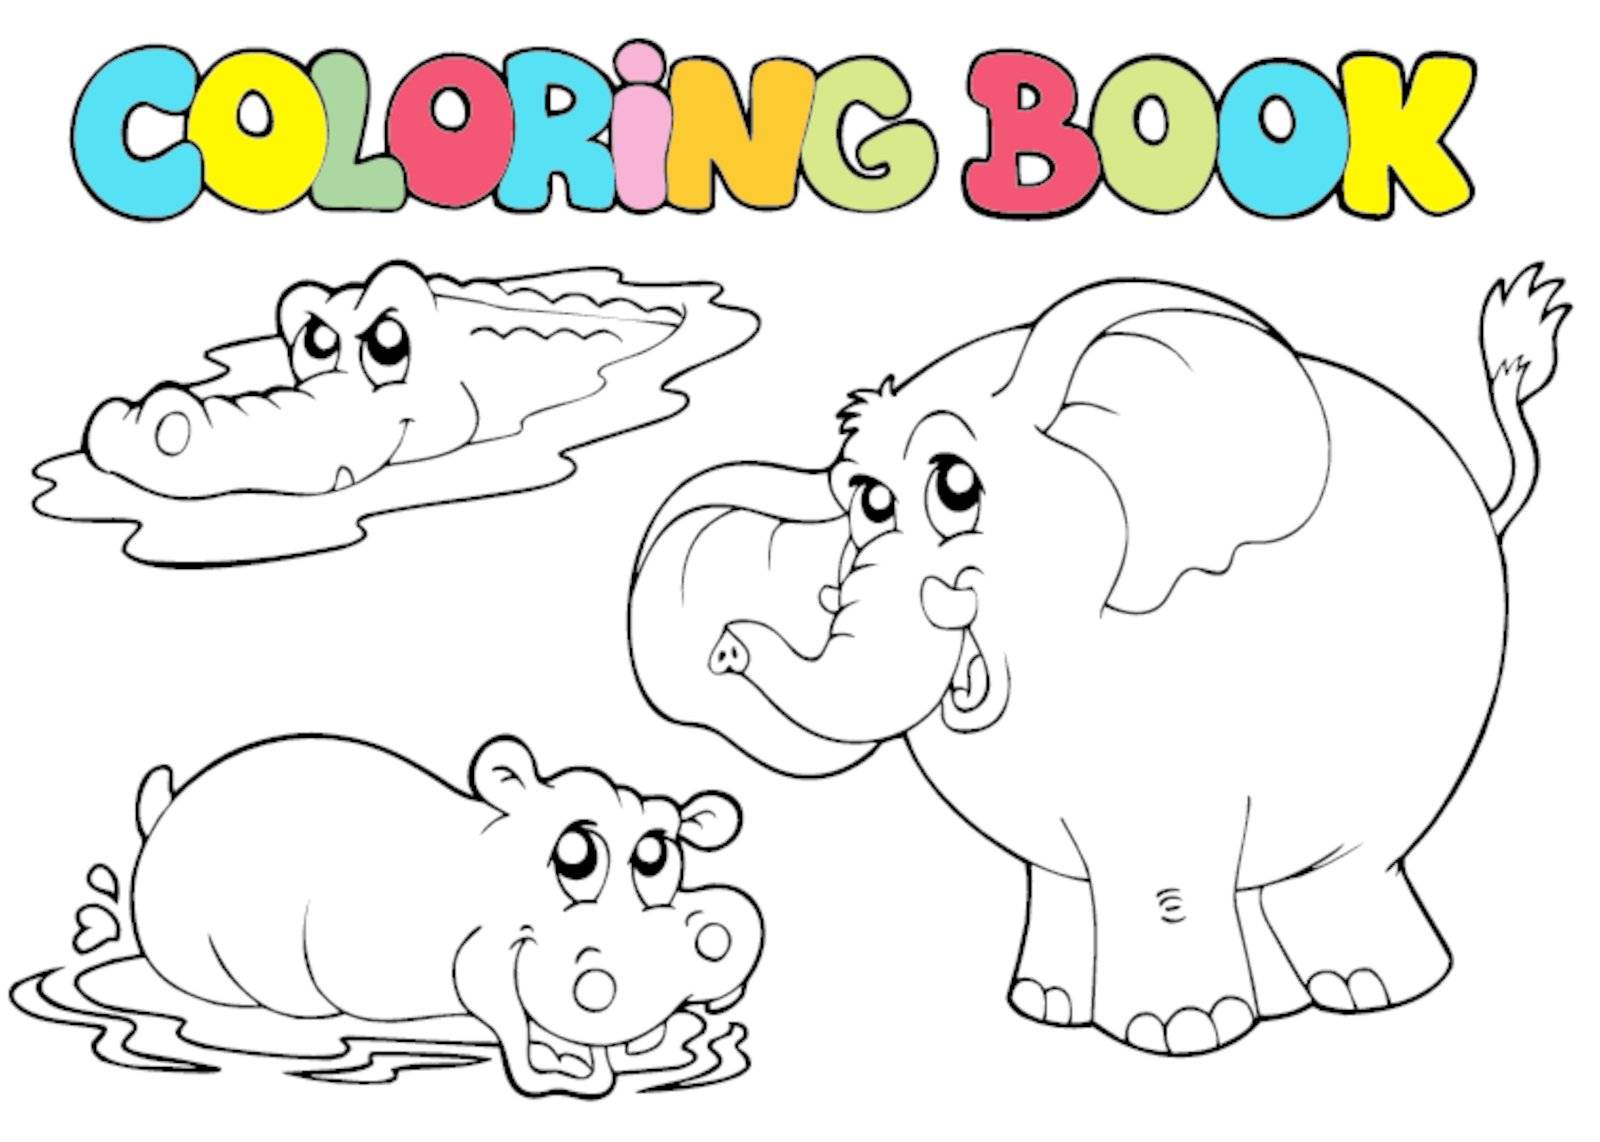 Coloring book with tropic animals 1 by clairev